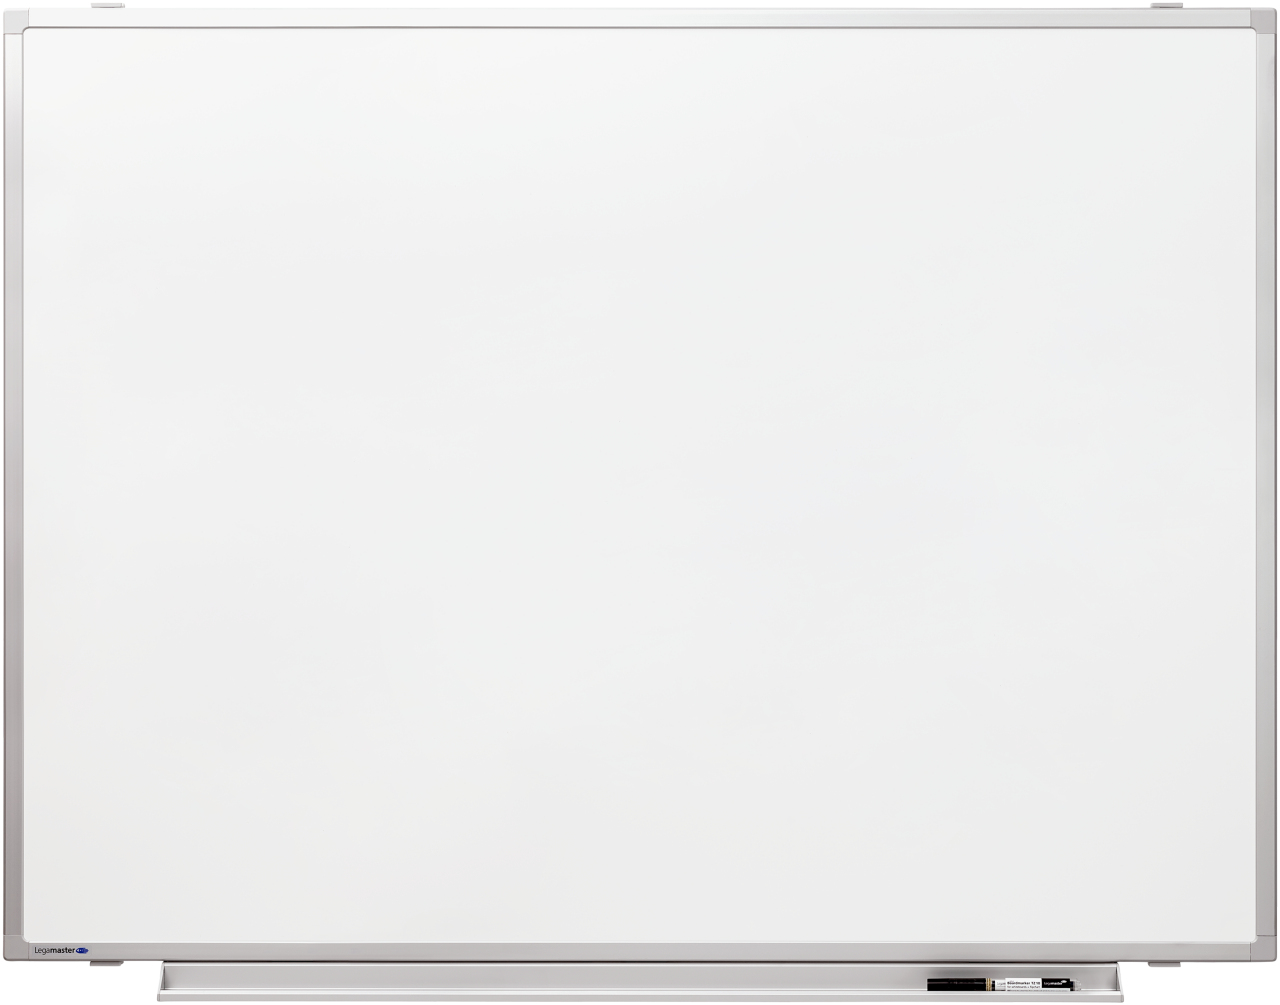 Professional Whiteboard Email 90 x 120 cm